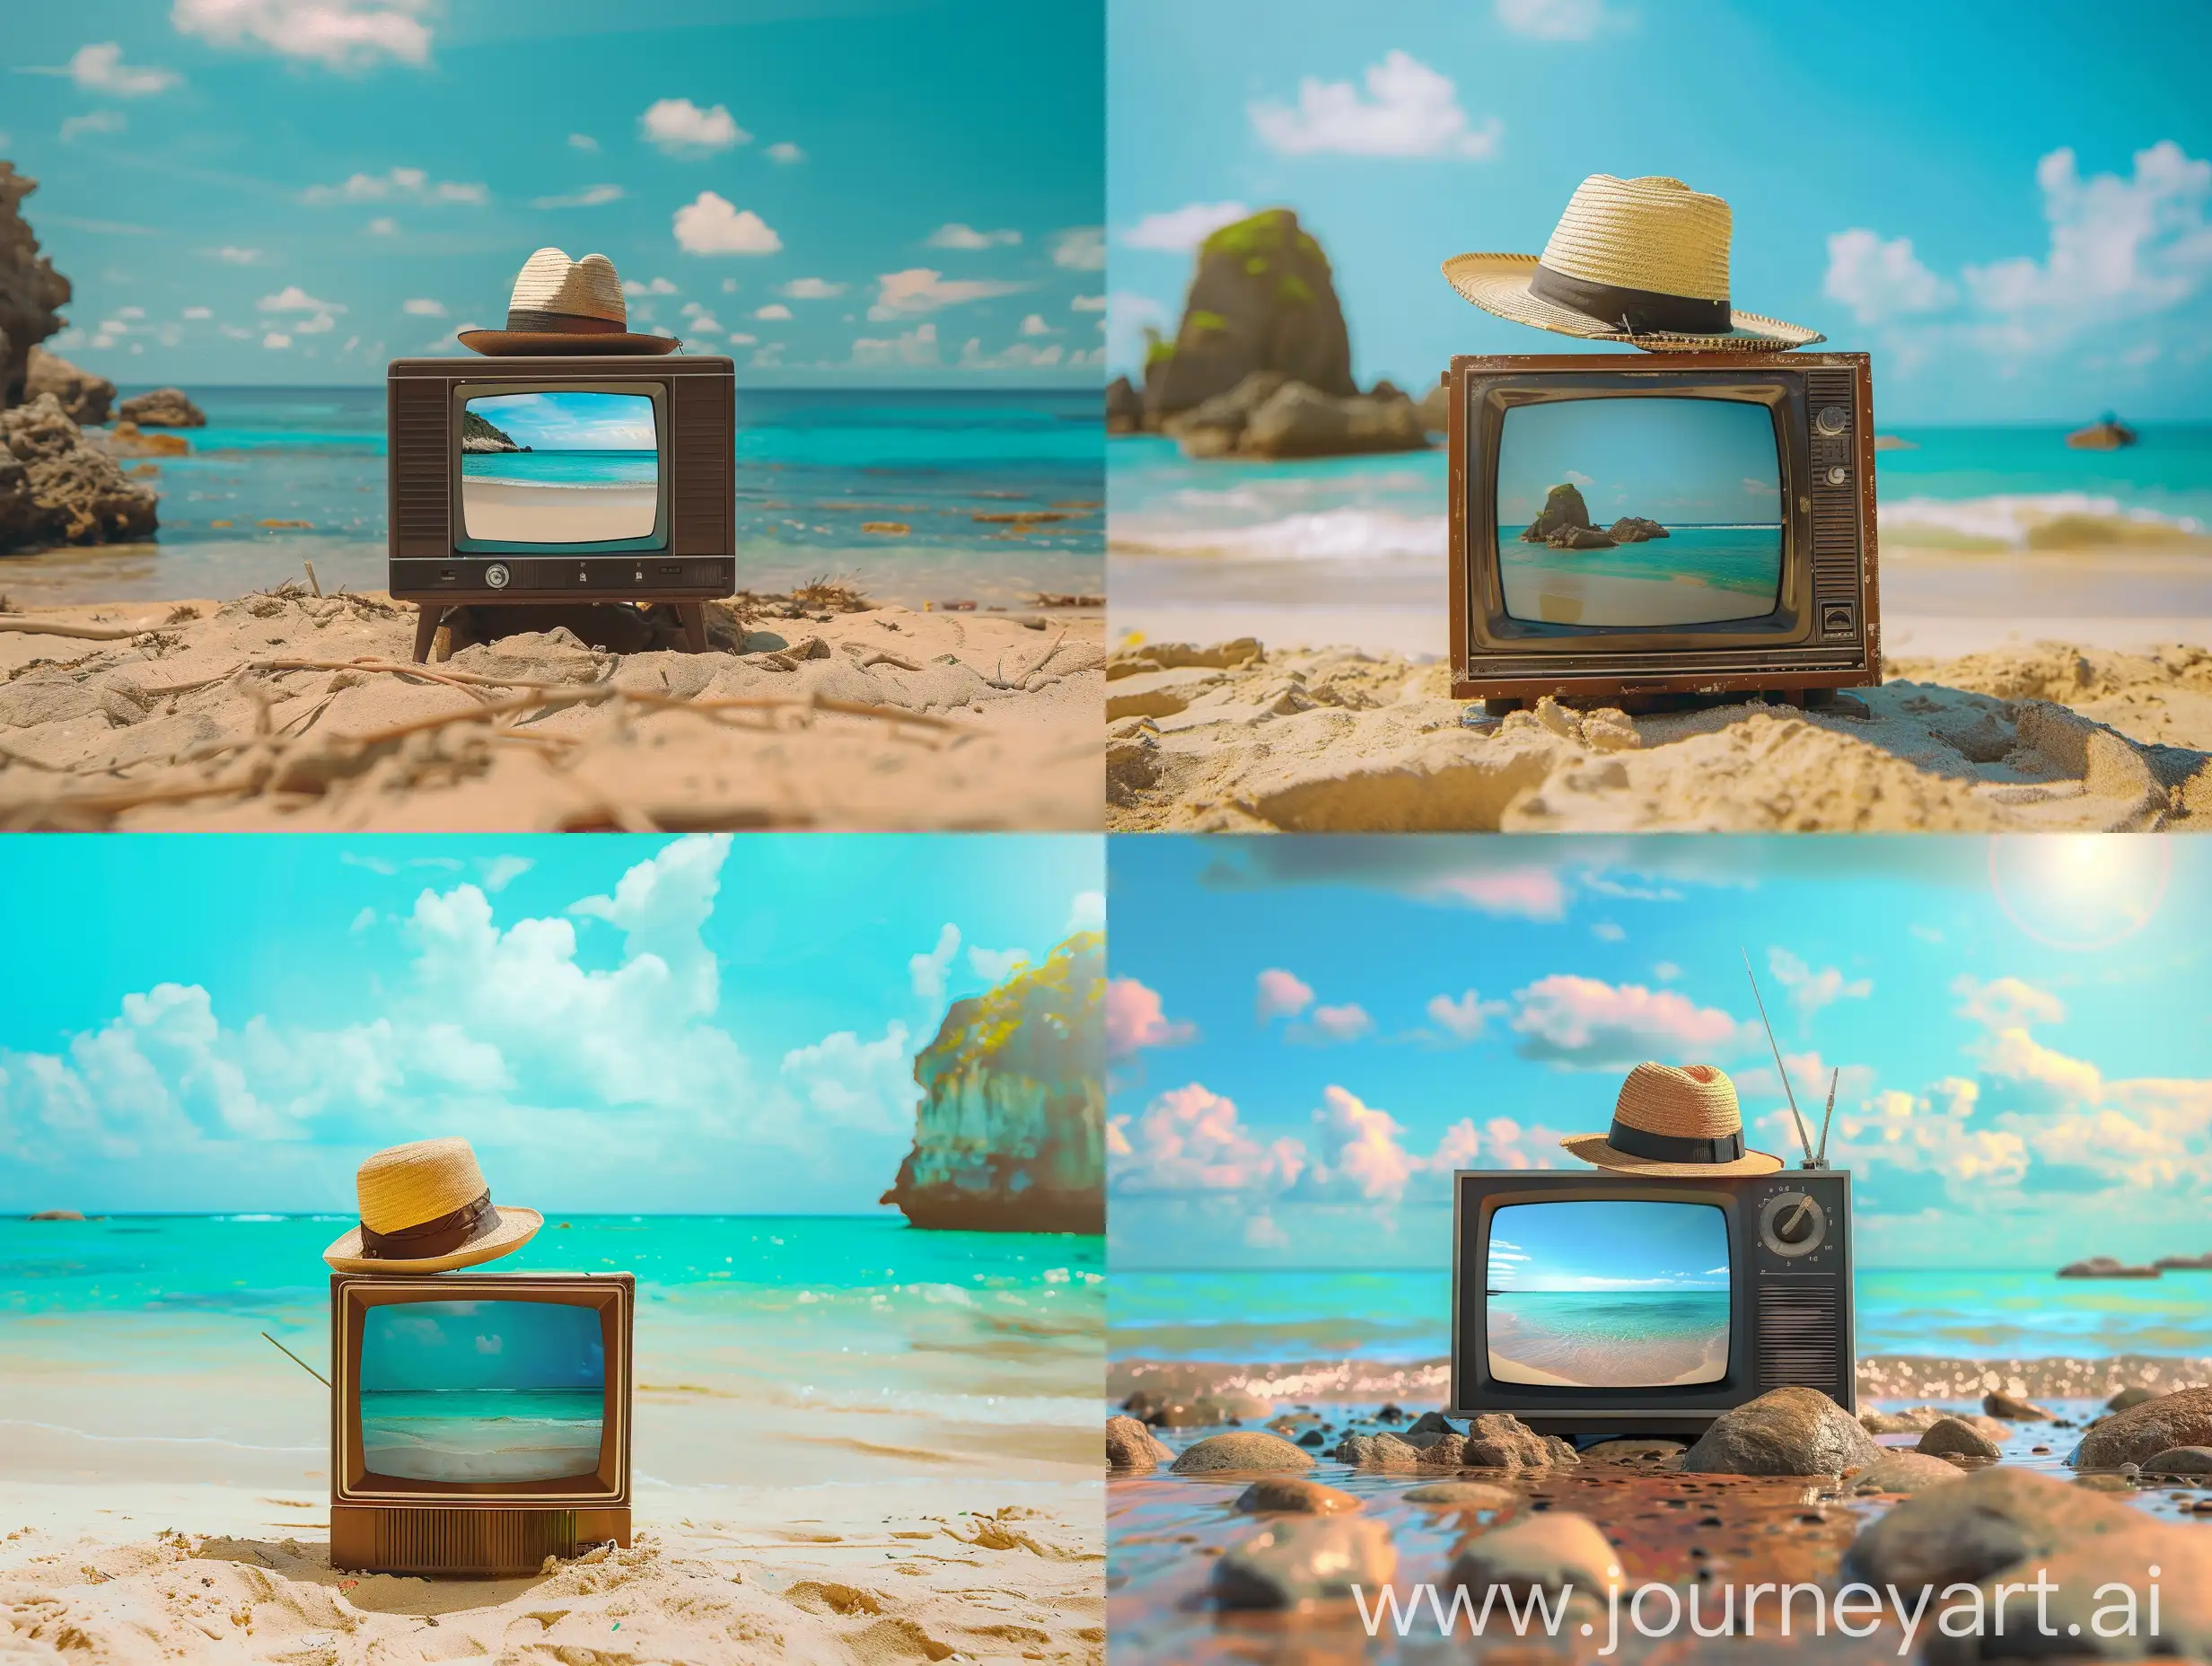 Panama-Hat-on-Old-TV-at-Beach-with-Sea-and-Sky-Background